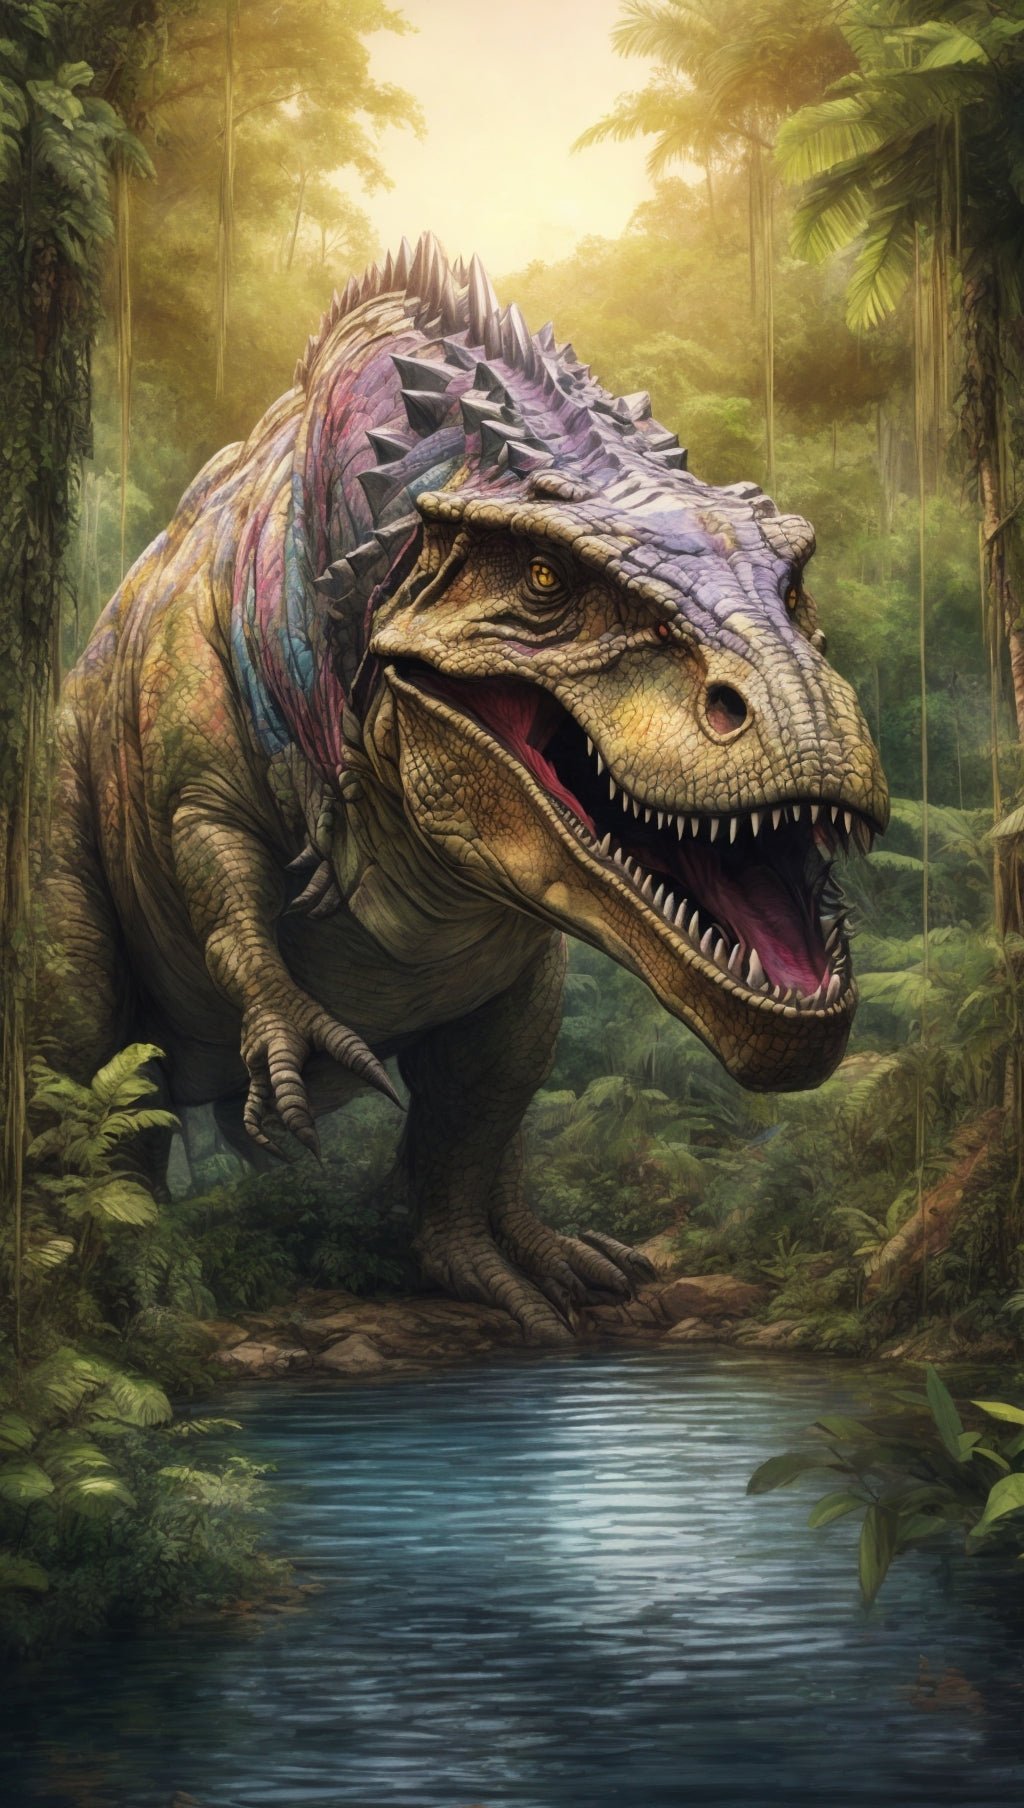 Jurassic Jungle - Paint by Numbers - Artslo.com